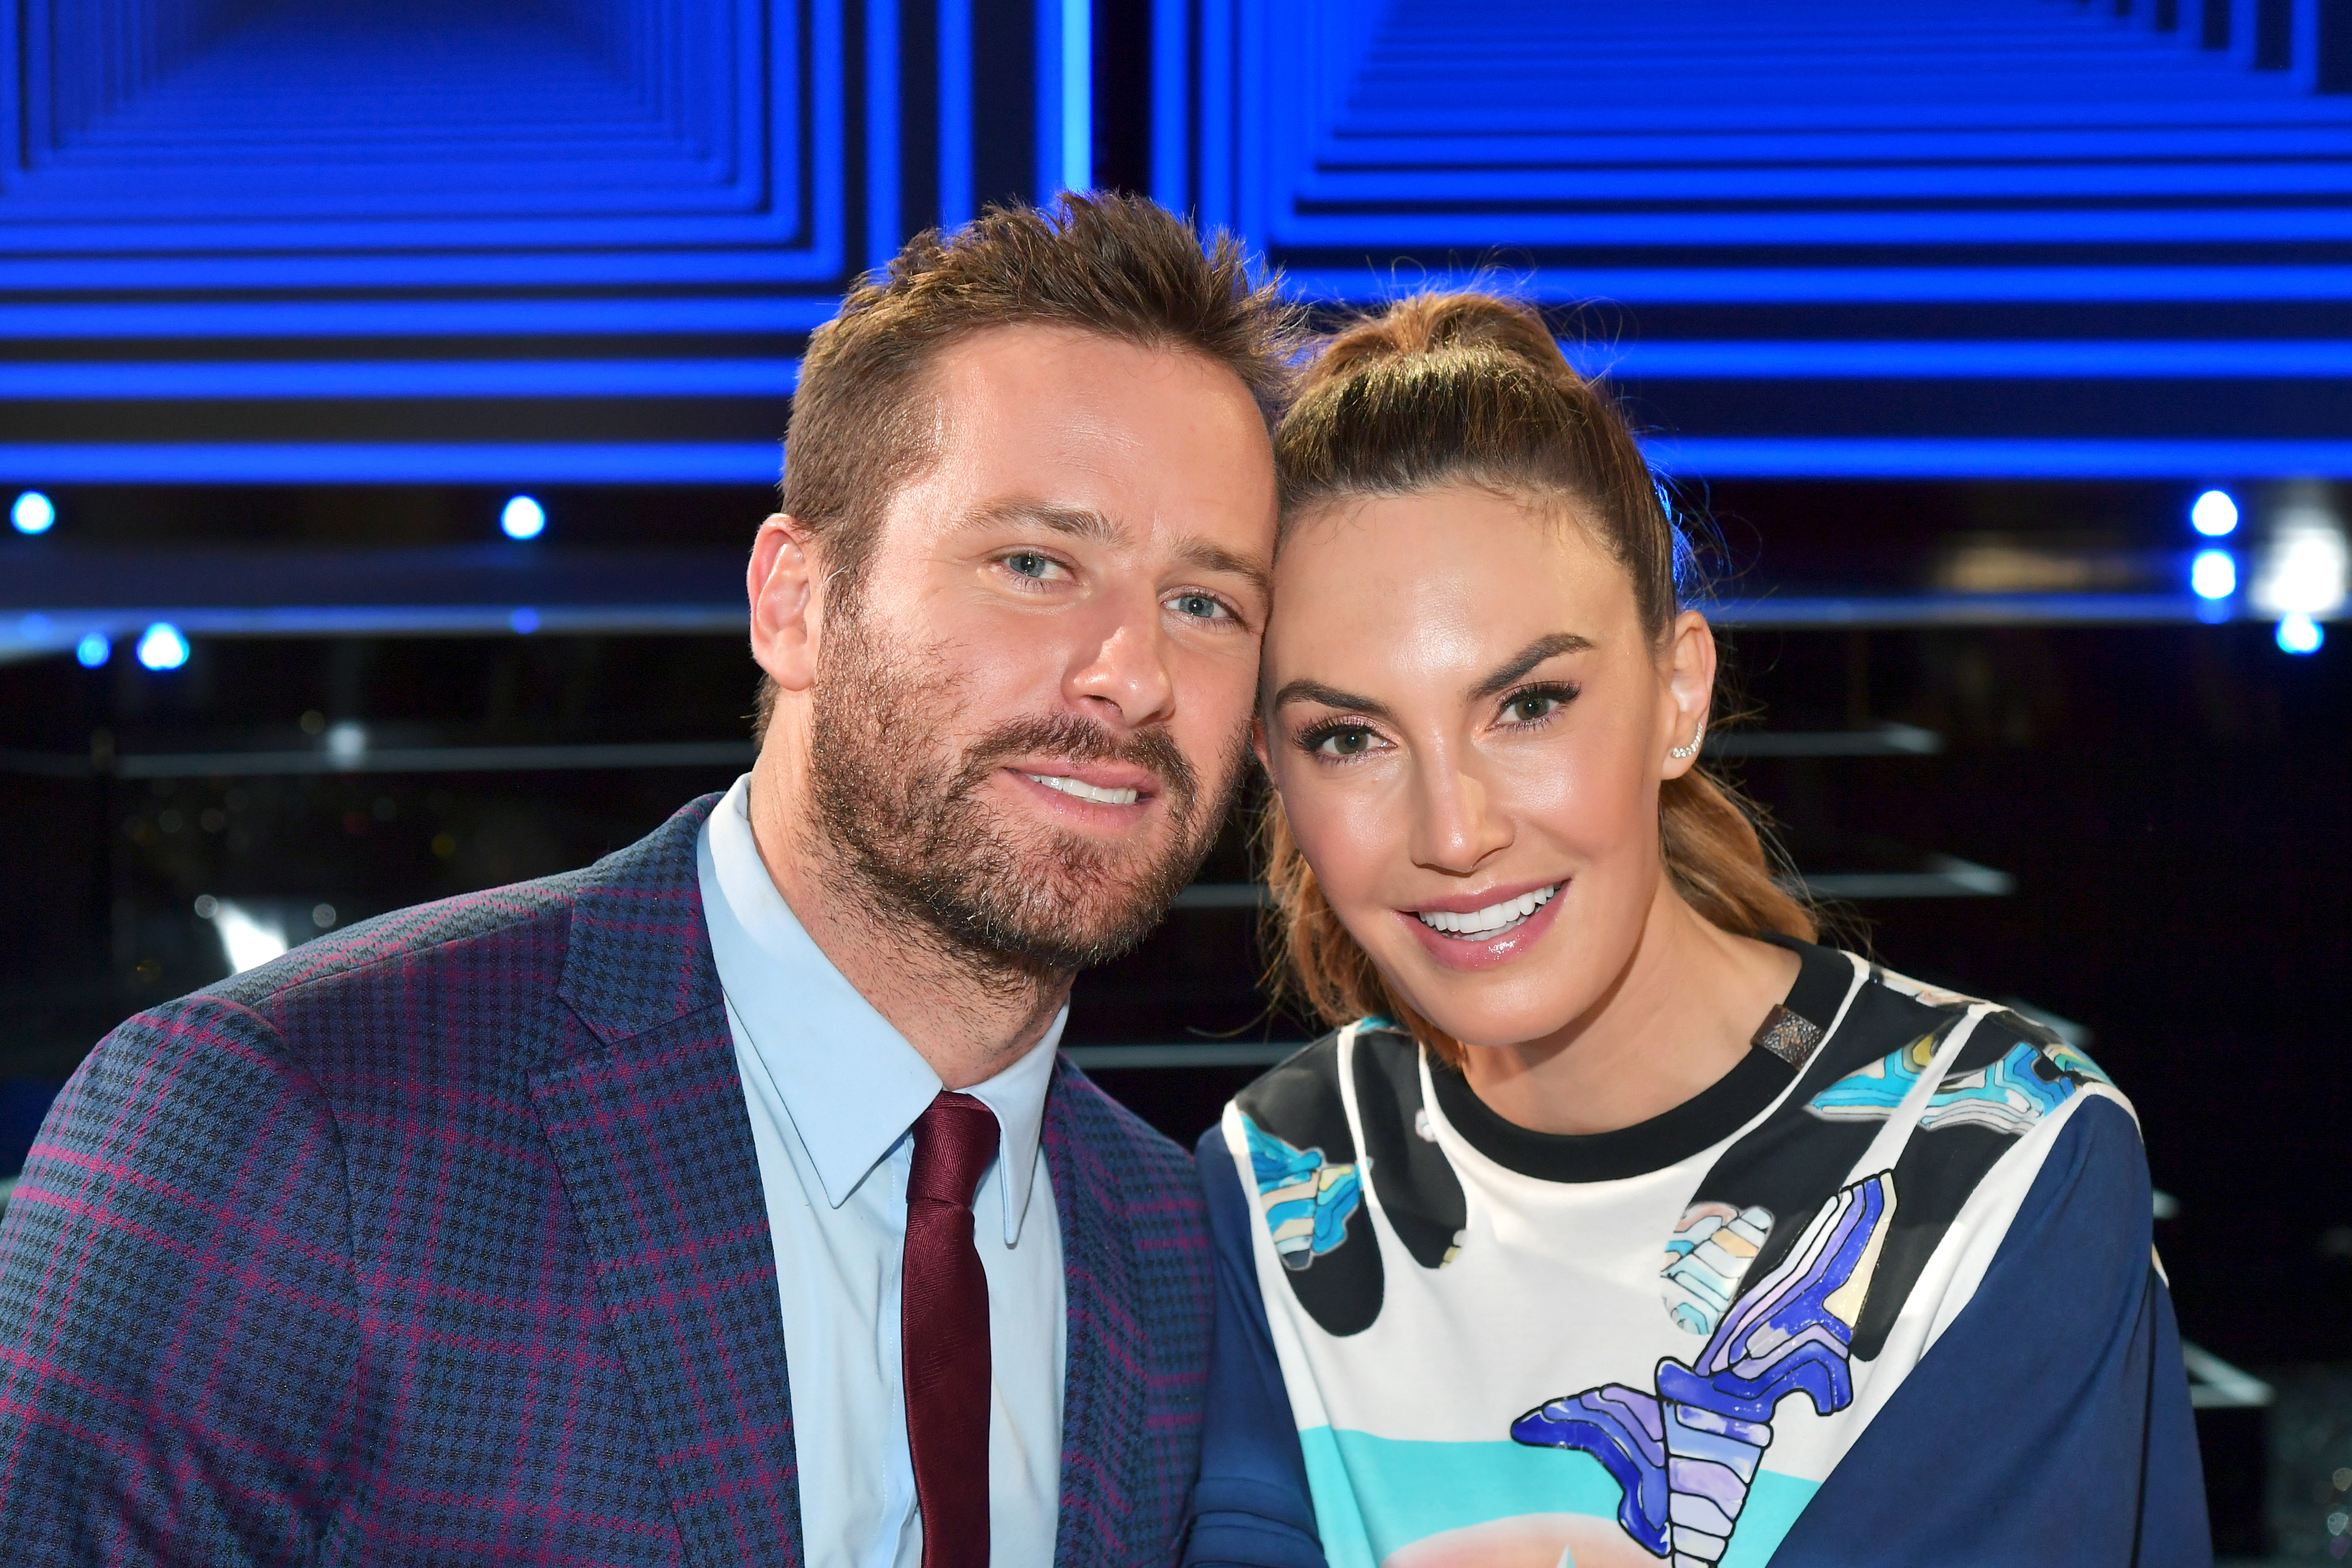 Armie Hammer and Elizabeth Chambers close together, smiling. Hammer in a plaid suit, Chambers in a print dress